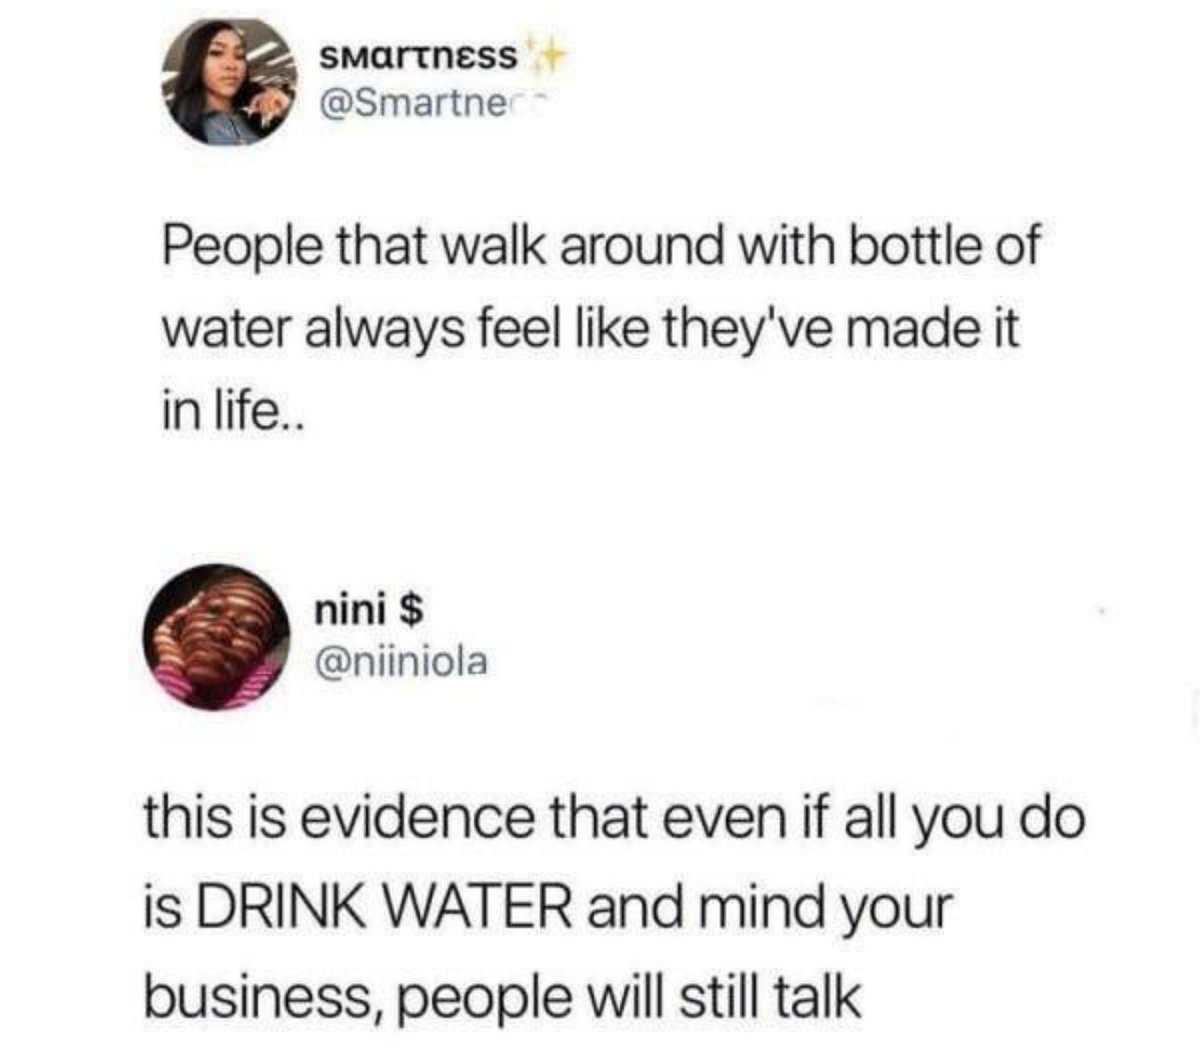 Mind your business